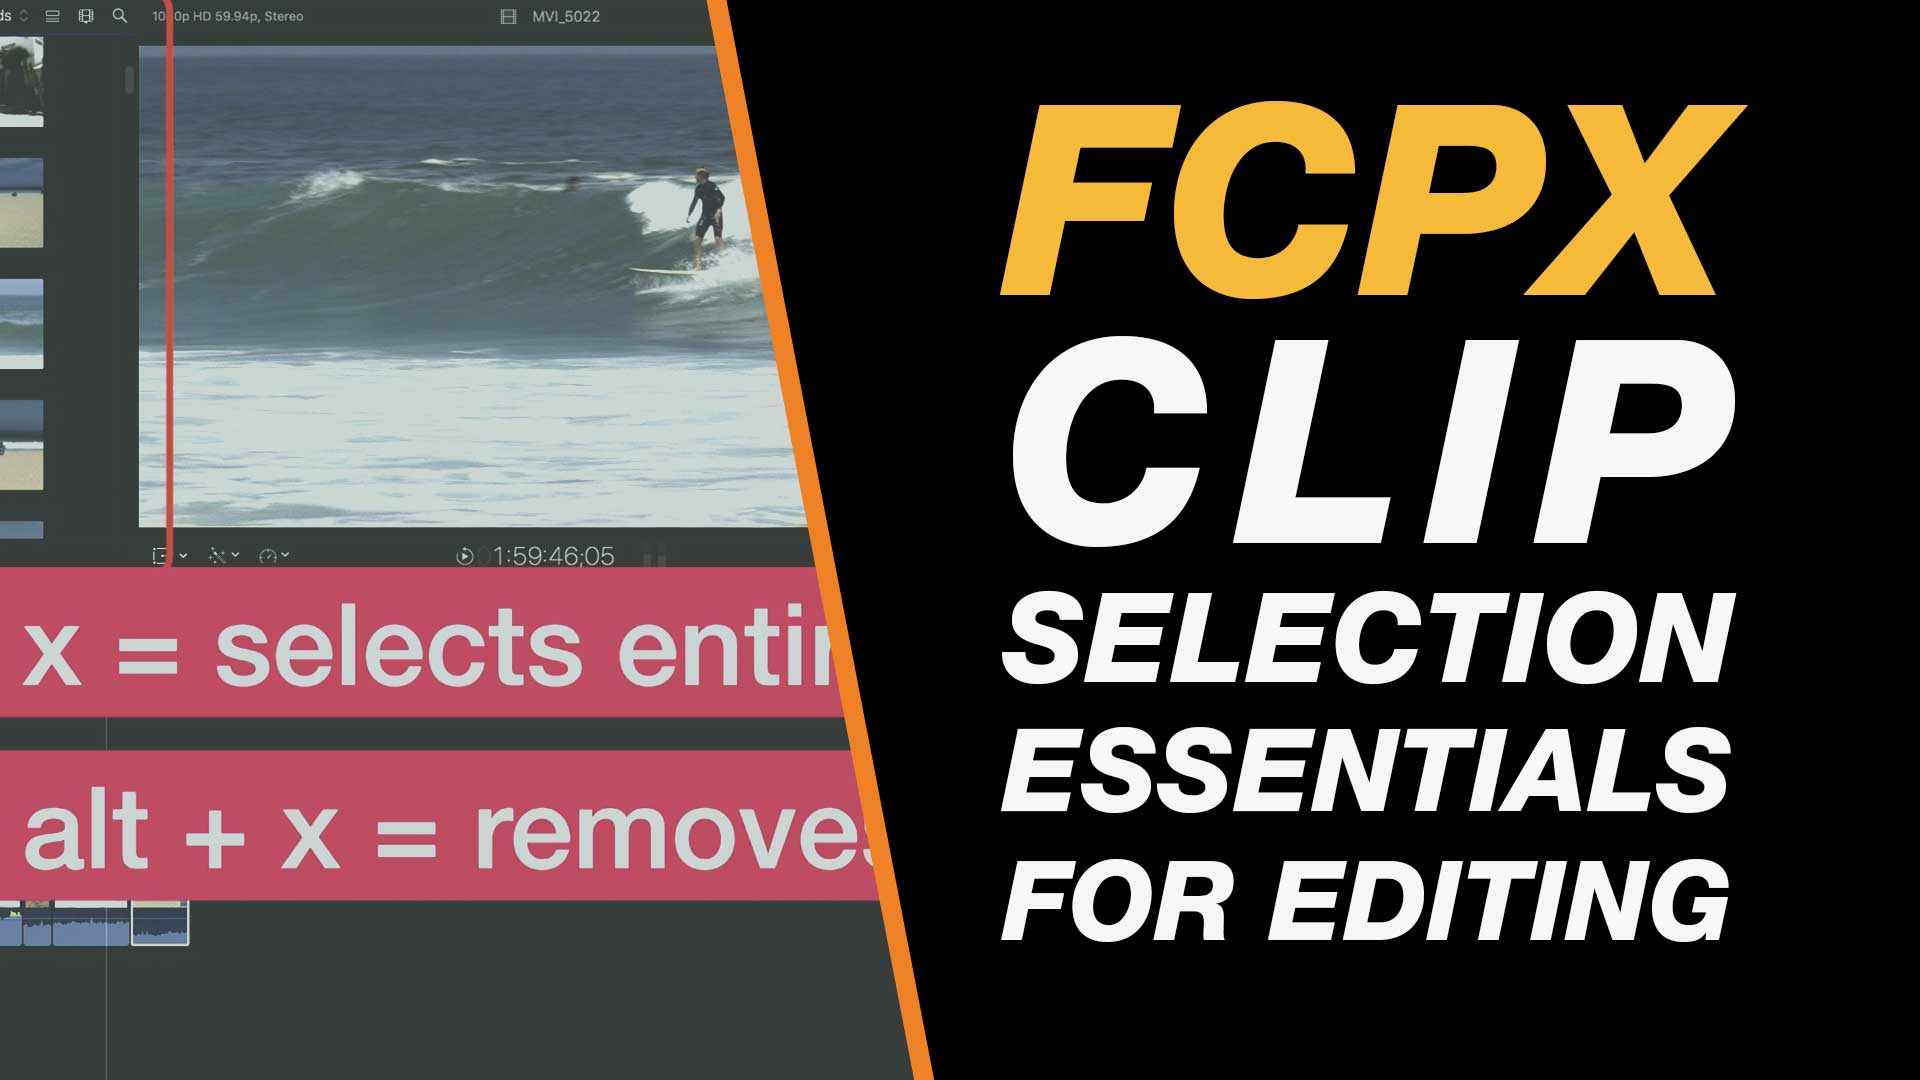 Final Cut Pro X: Clip Selections Tips & Shortcuts for Video Editing